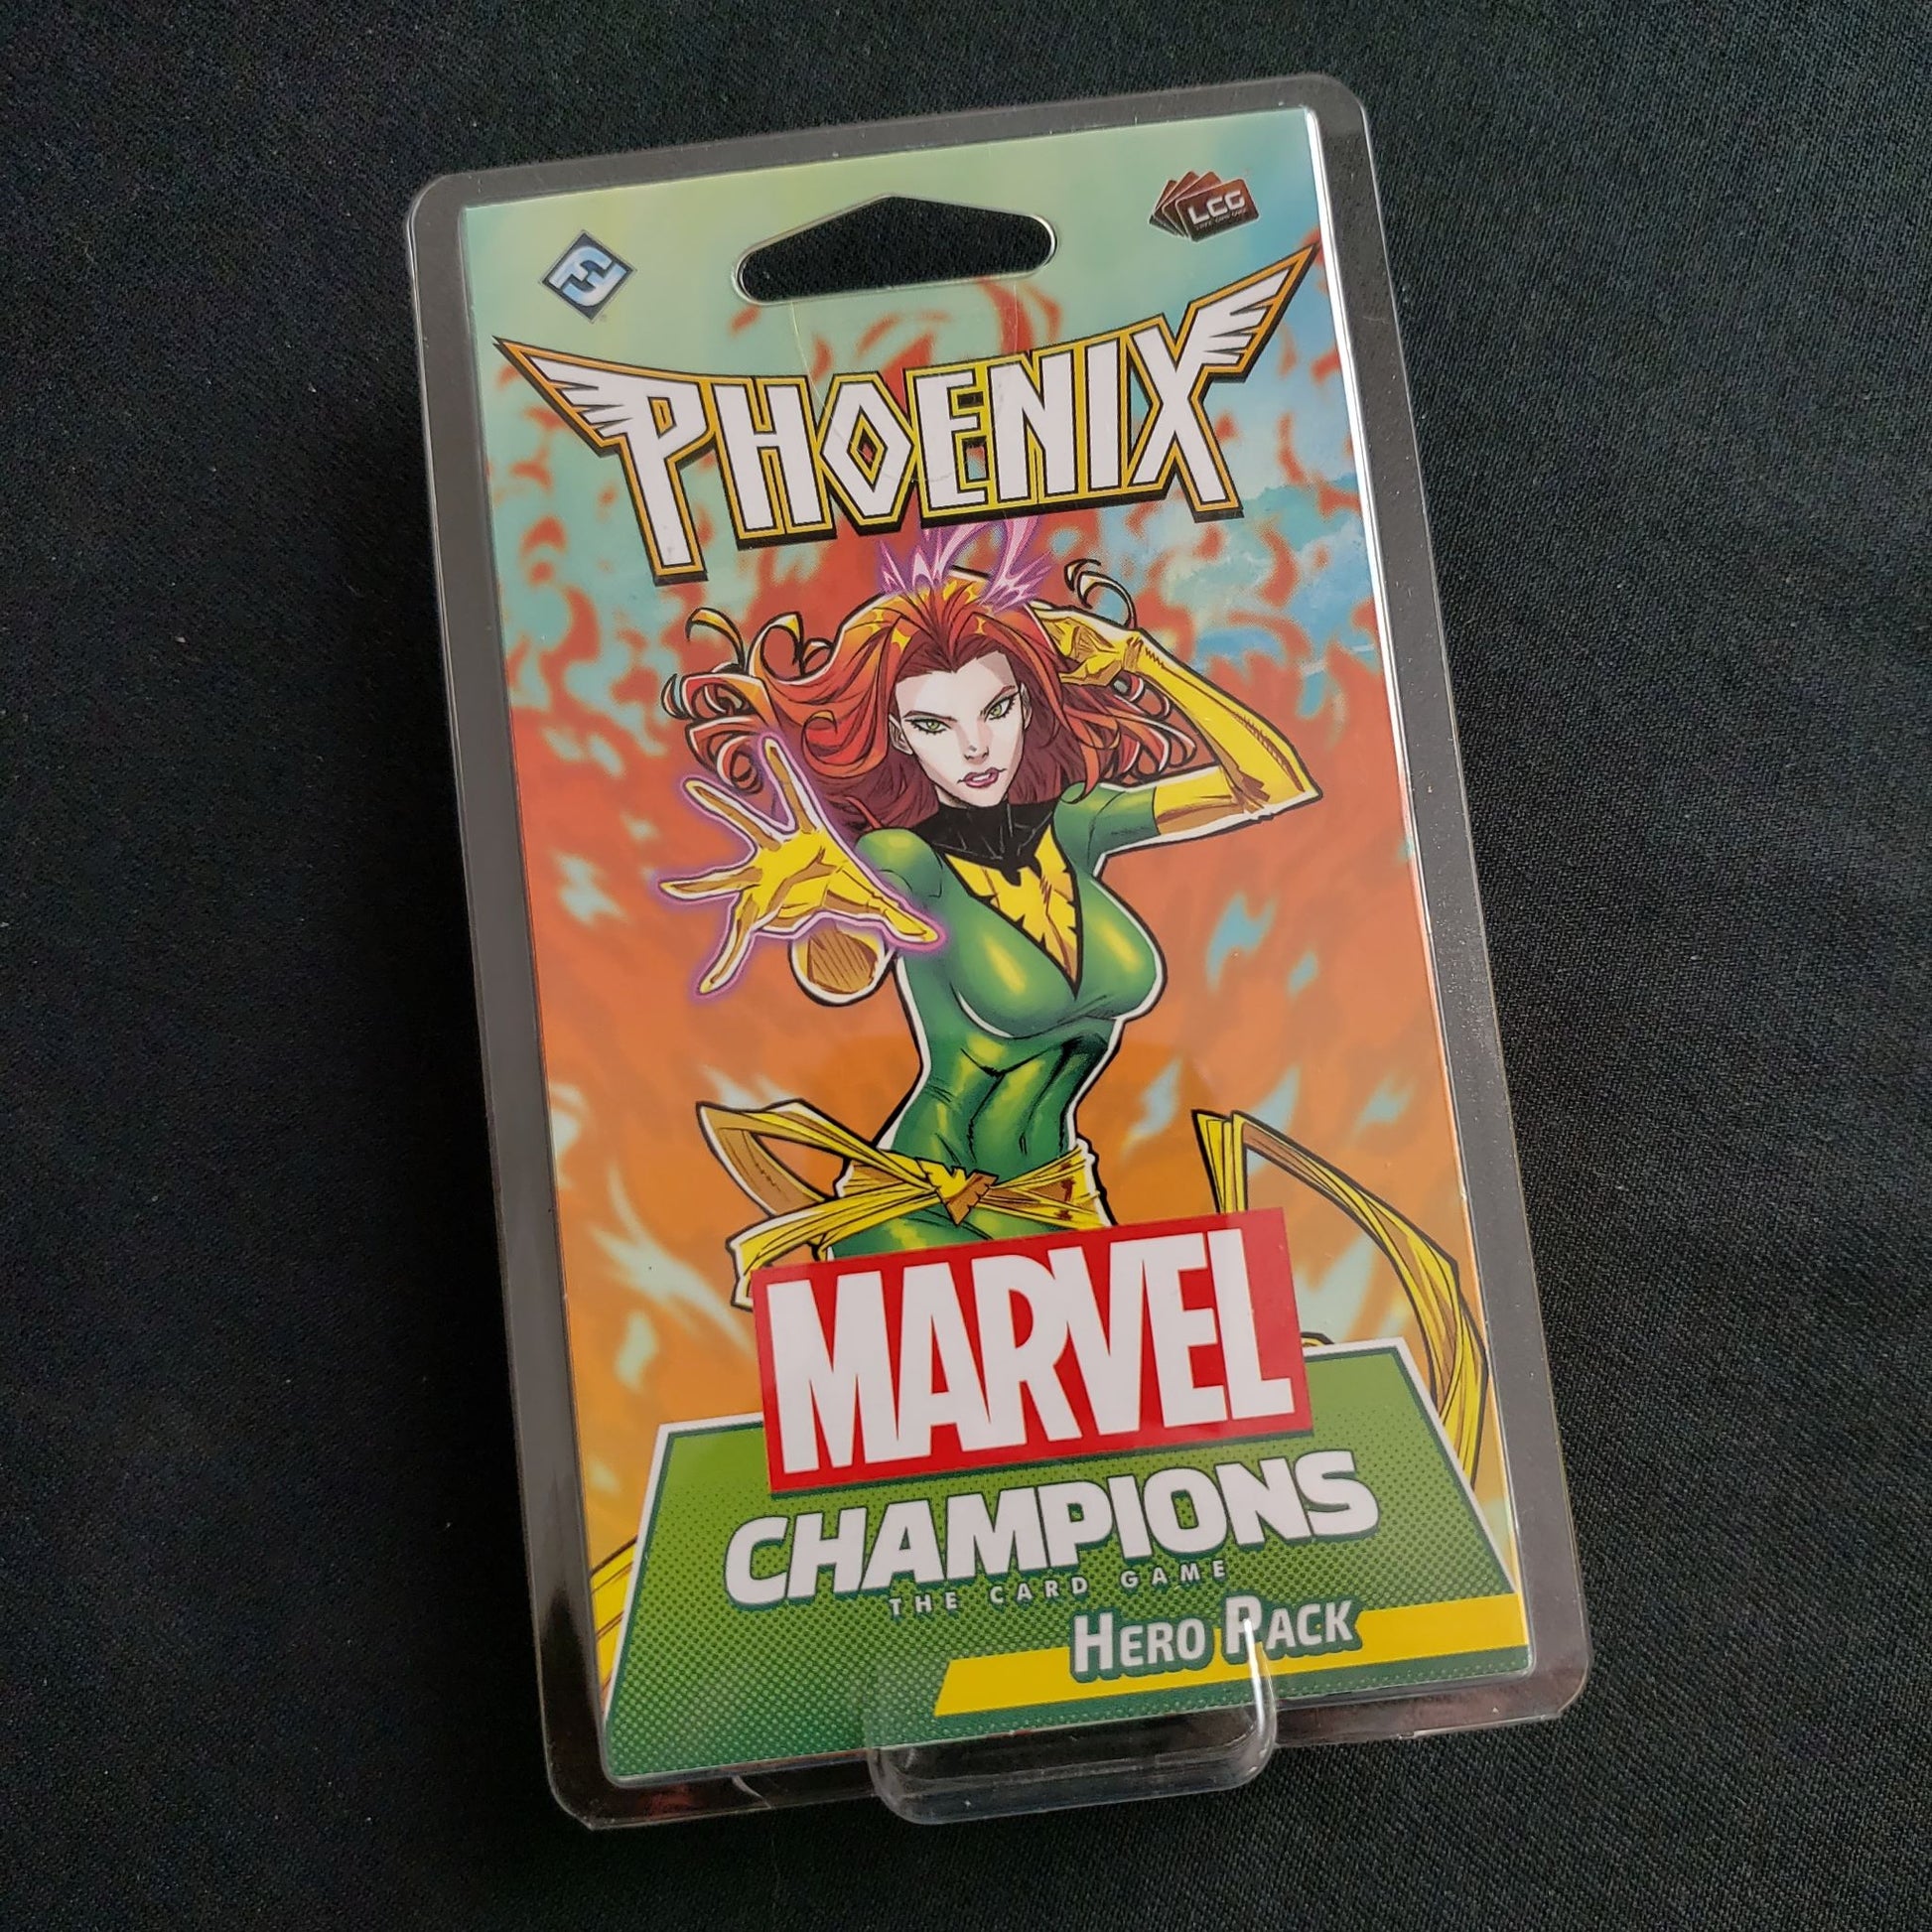 Image shows the front of the package for the Phoenix Hero Pack for the Marvel Champions card game